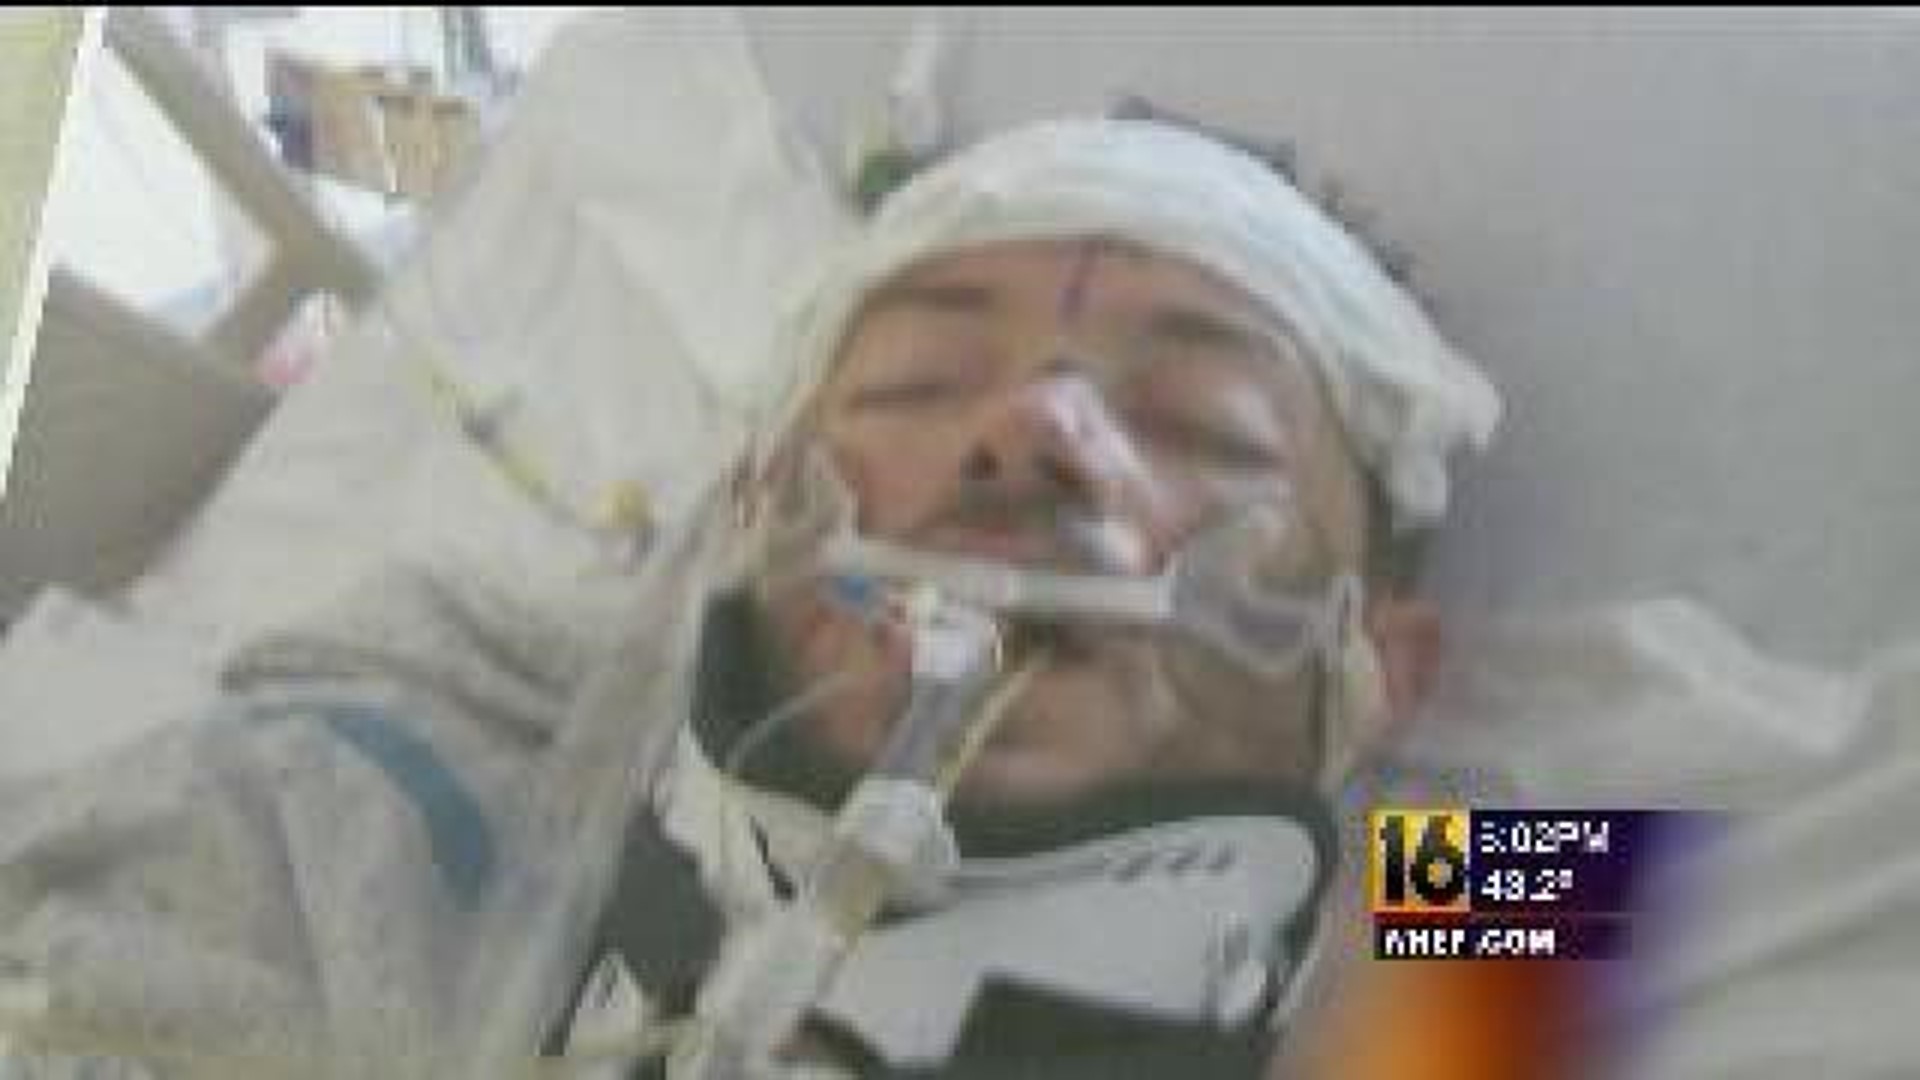 Police: Beating Victim Likely Dragged Down Street by Attackers